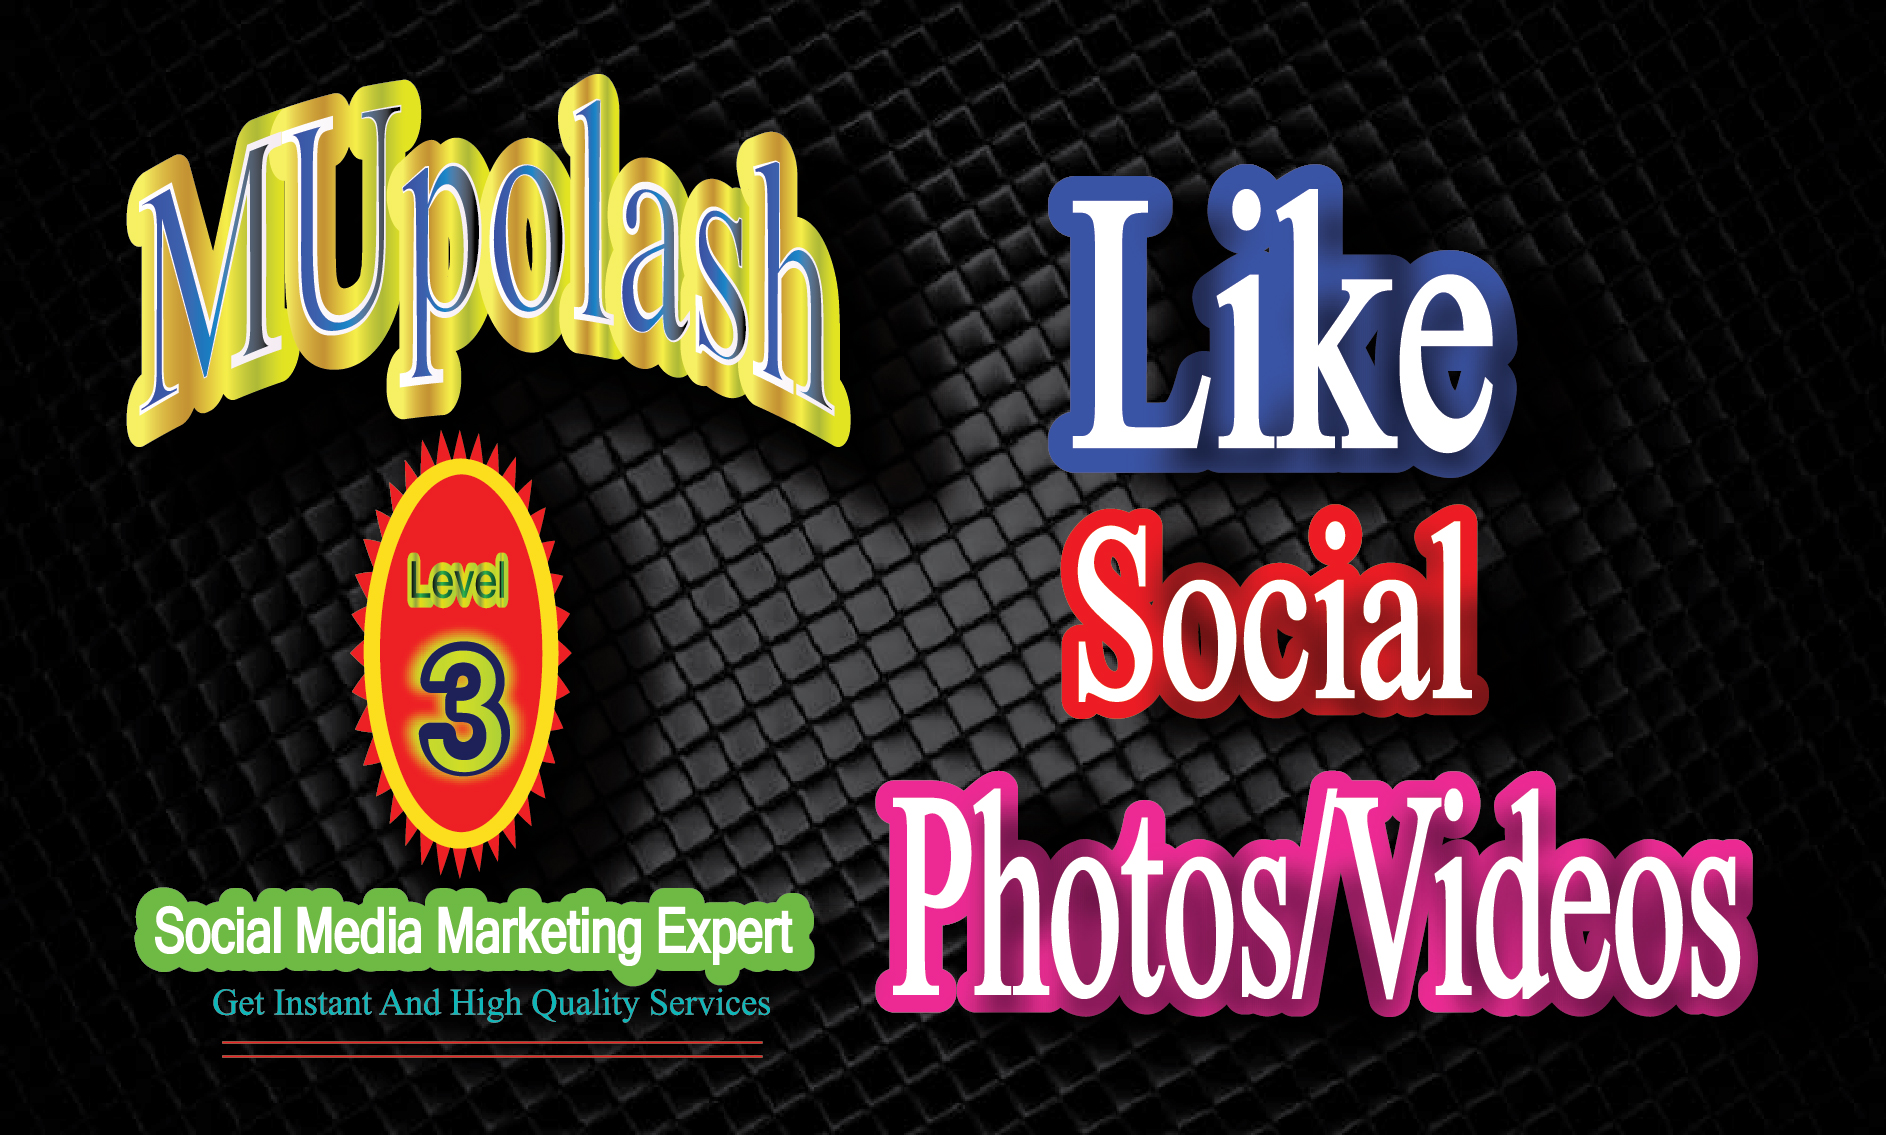 Get Faster On your social post/photos/videos,(No-refil)